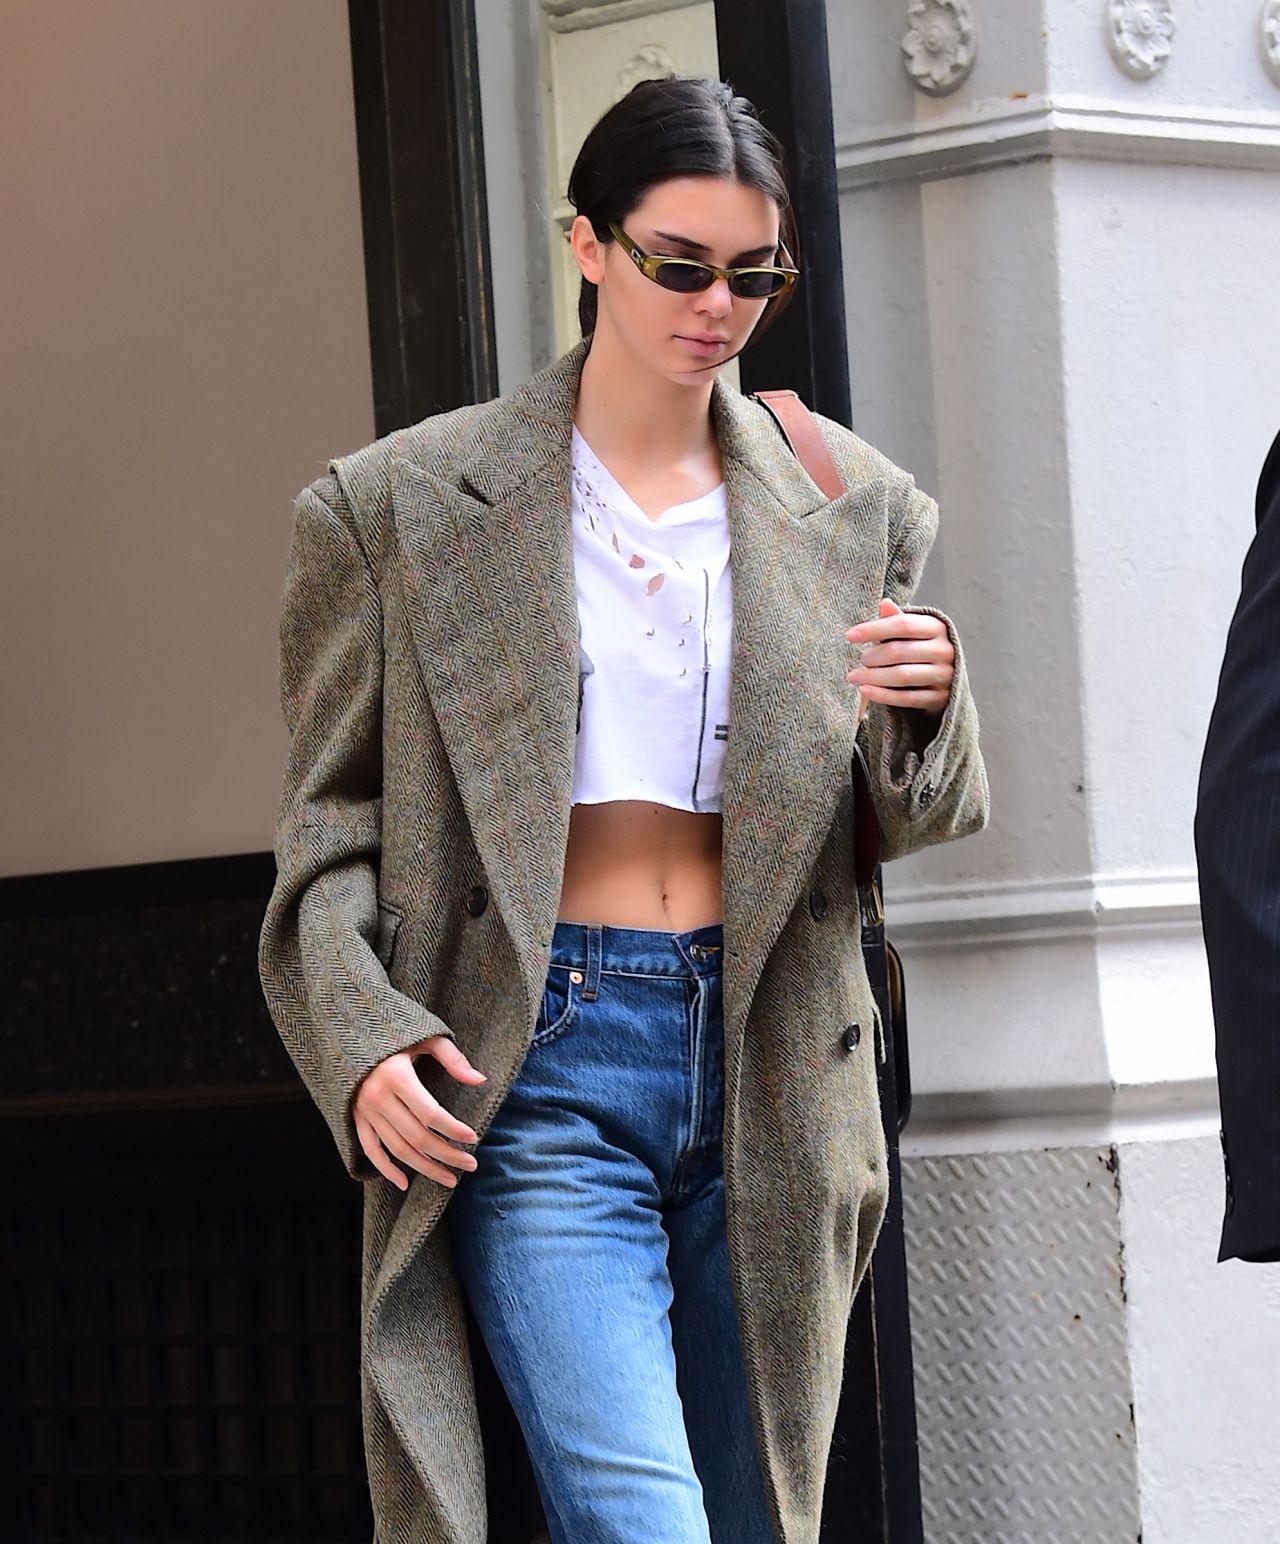 Kendall Jenner in a Crop Top and Jeans - NYC 09/07/2017 • CelebMafia